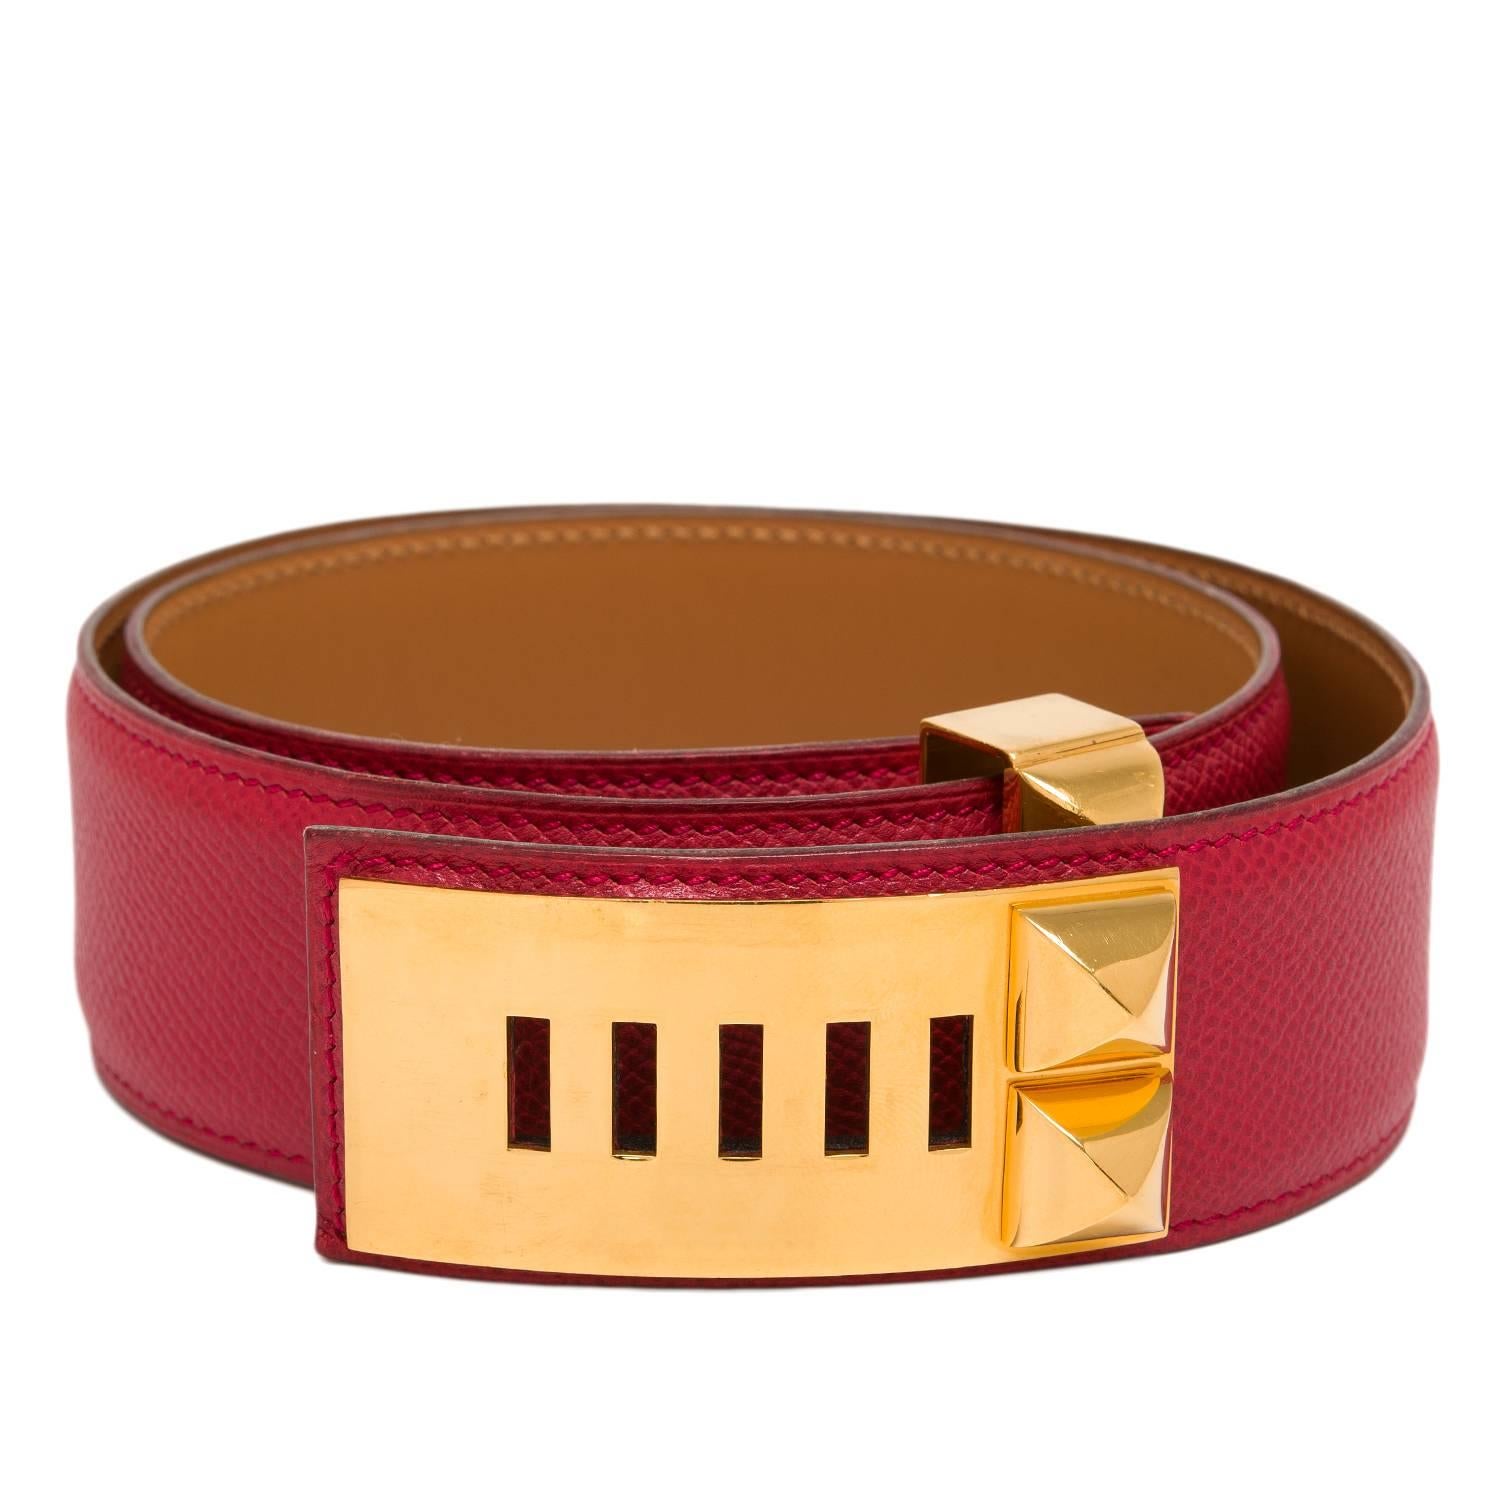 Hermes Rouge Vif Collier de Chien Medor belt in courcheval leather with gold plated studded hardware, tonal stitching and adjustable gold plated closure. 

Origin: France

Condition: Excellent; the gold hardware is bright and shiny, however,